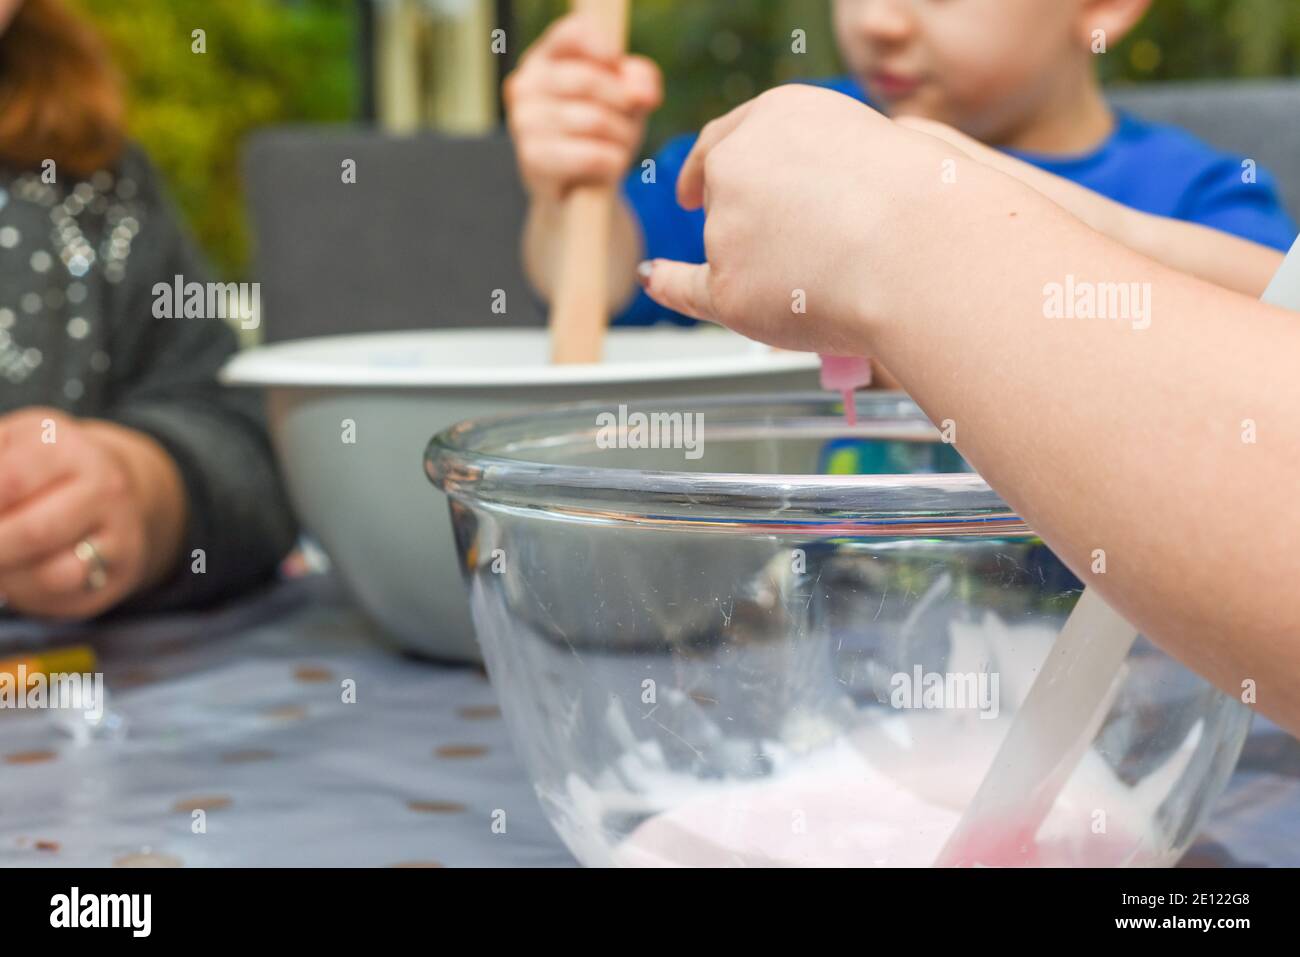 Kids activity of making slime as a science experiment for children to do indoors Stock Photo